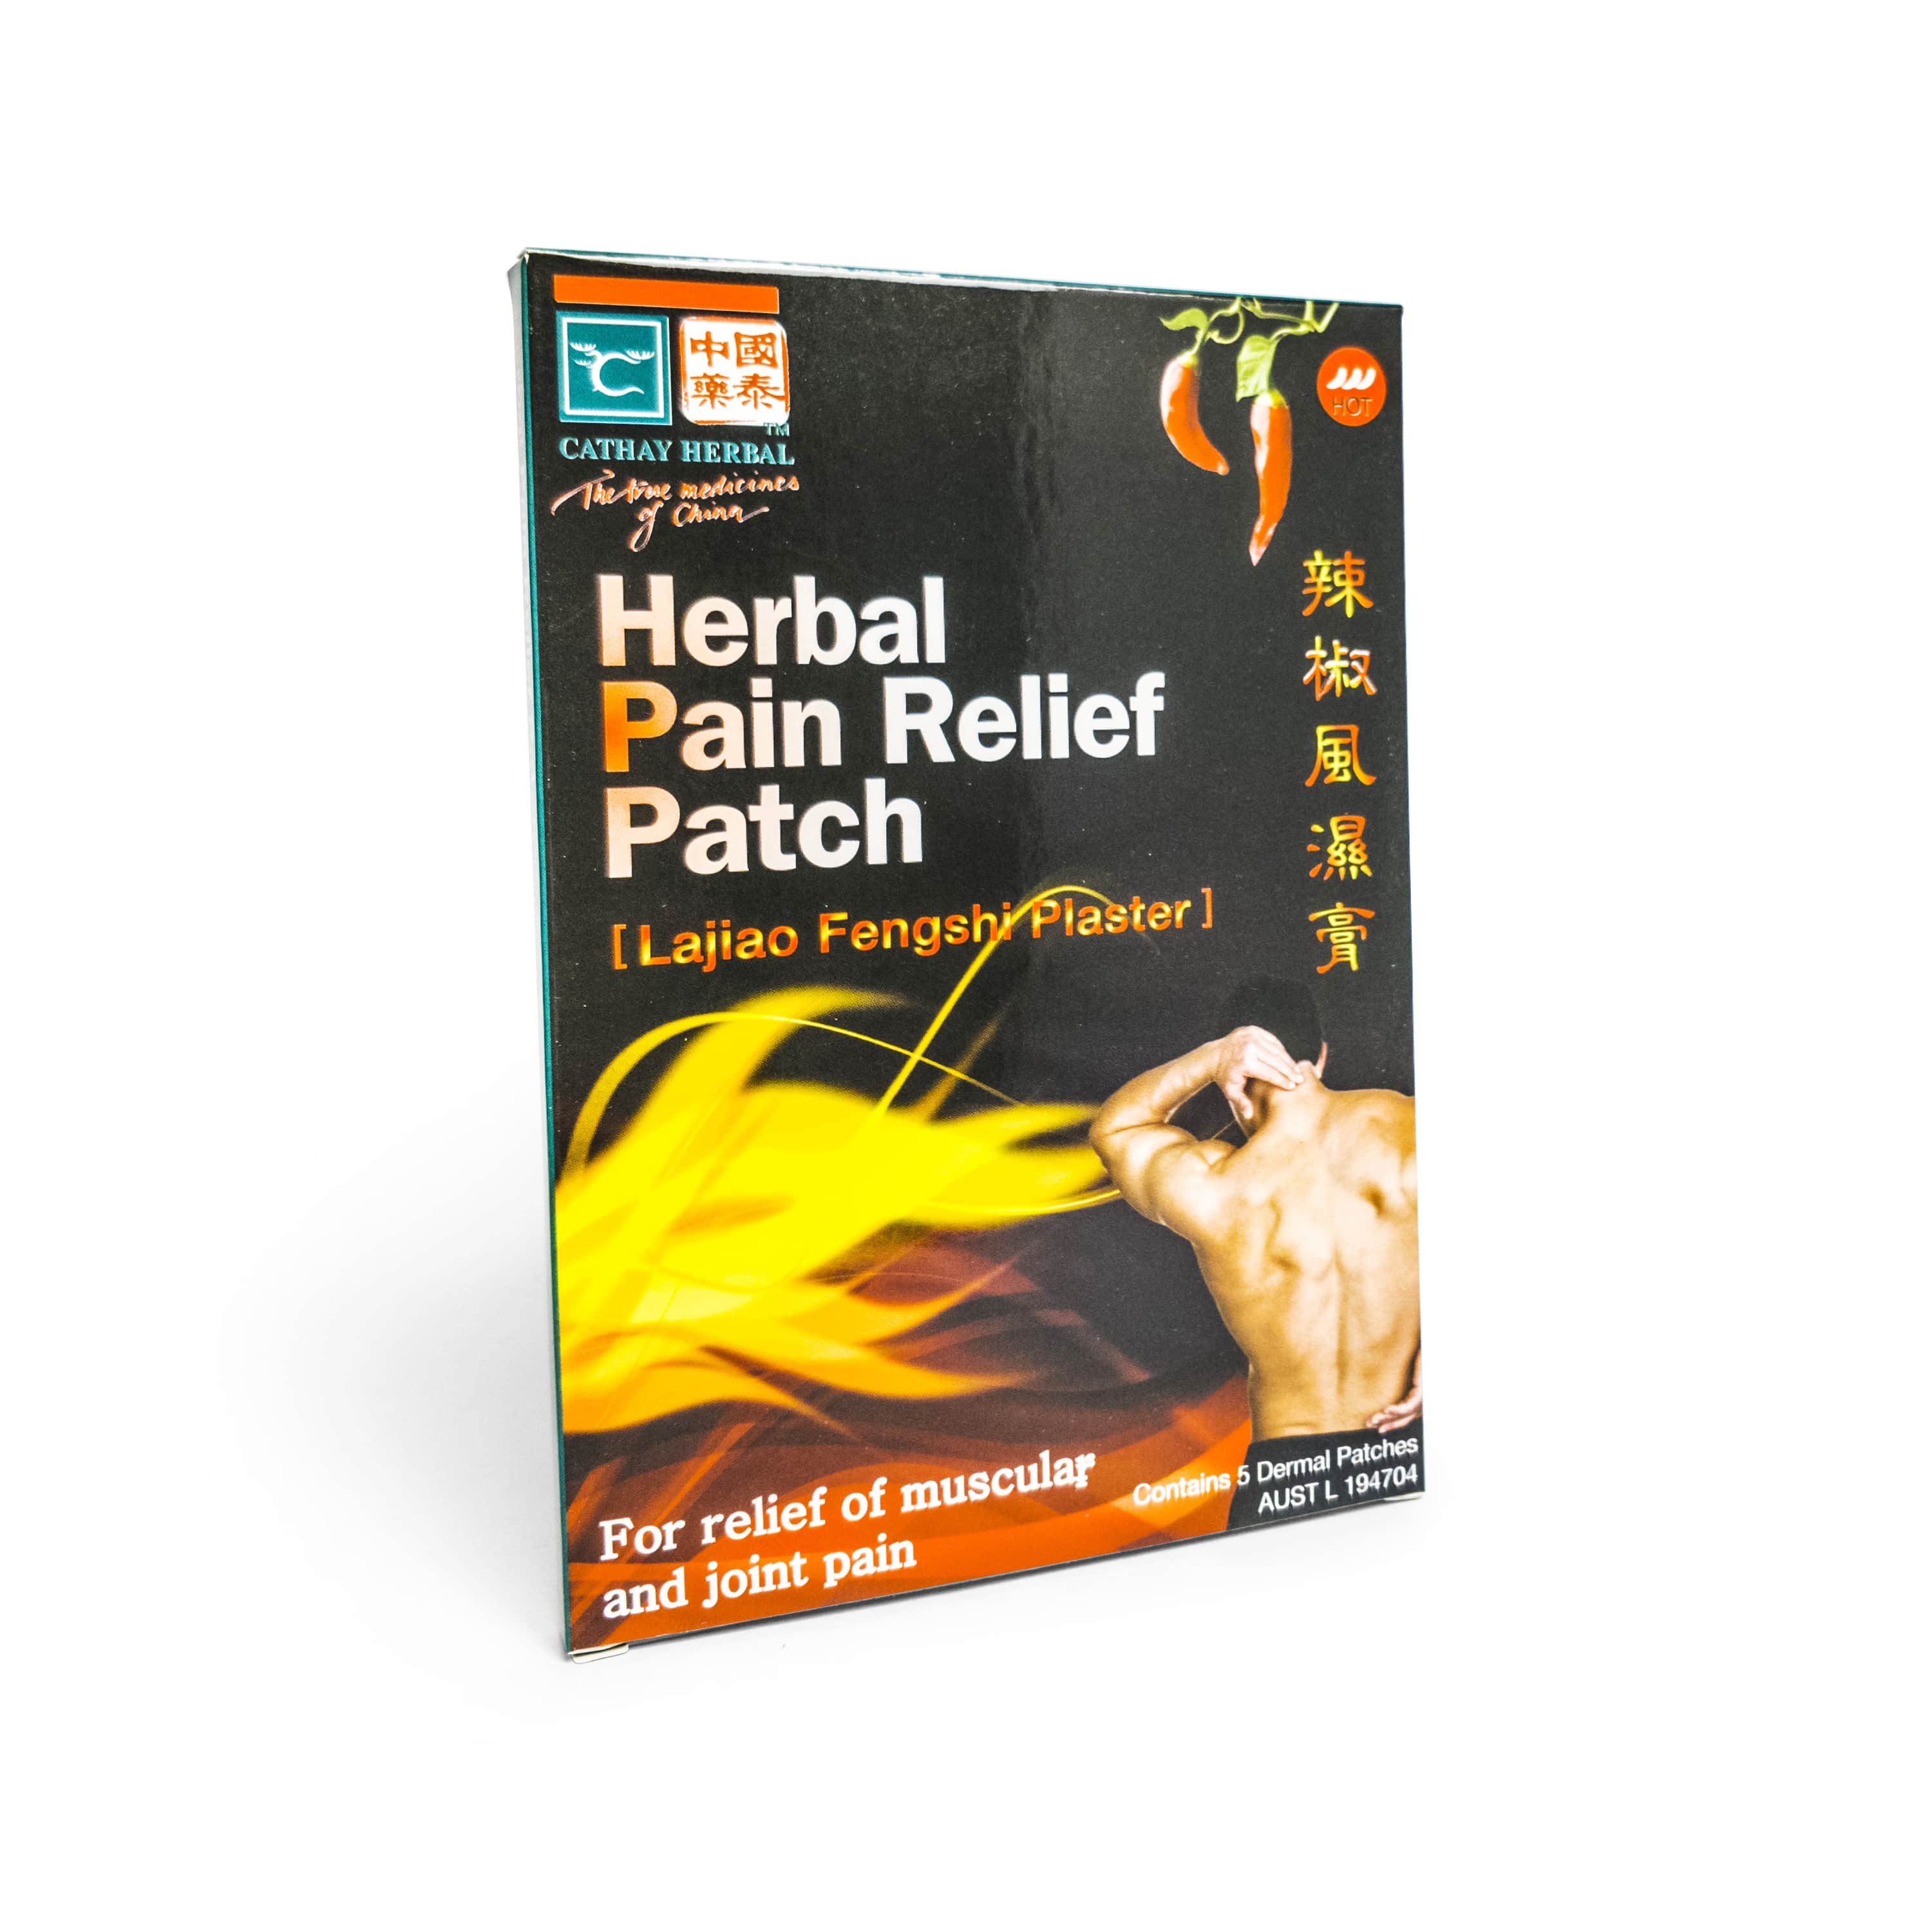 Herbal Pain Relief Patch (Lajiao Fengshi Plaster)